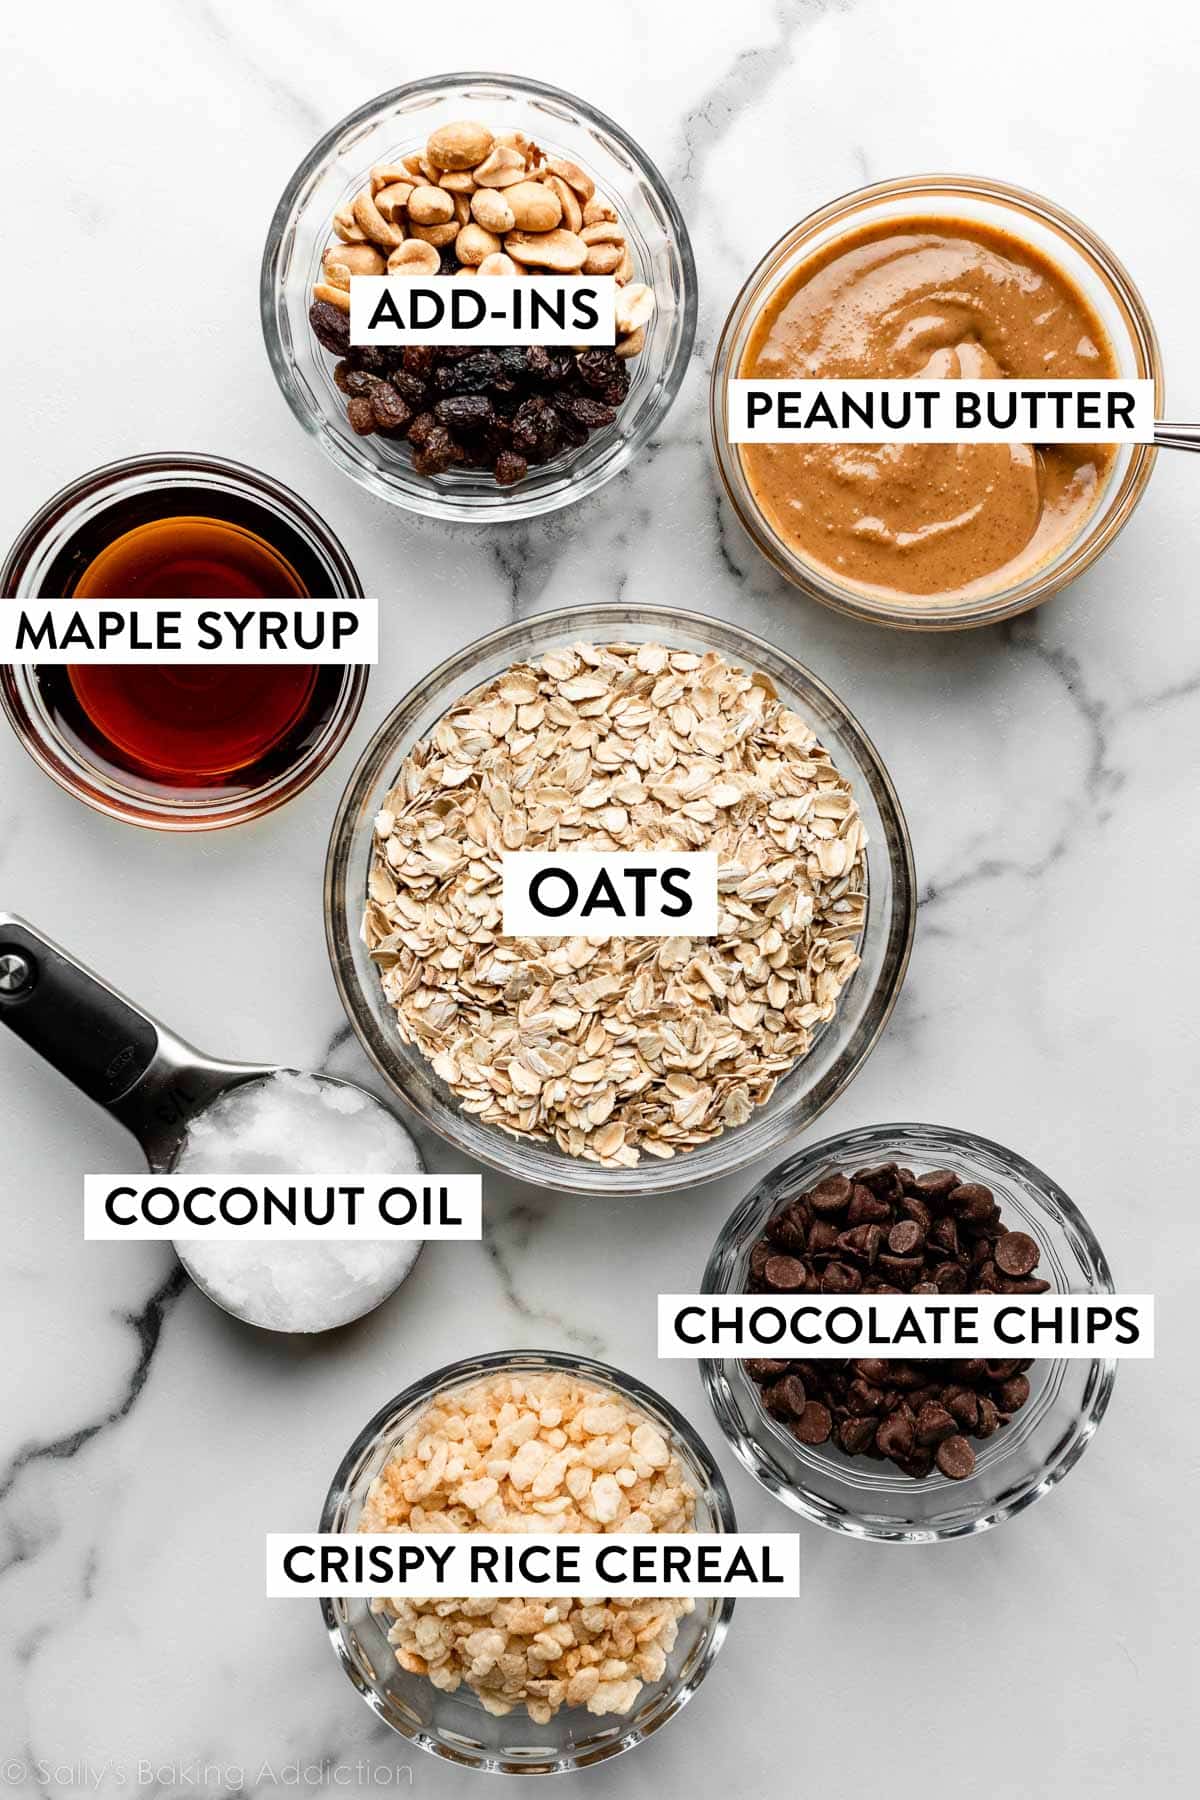 ingredients on counter including oats, maple syrup, peanut butter, coconut oil, chocolate chips, and more.